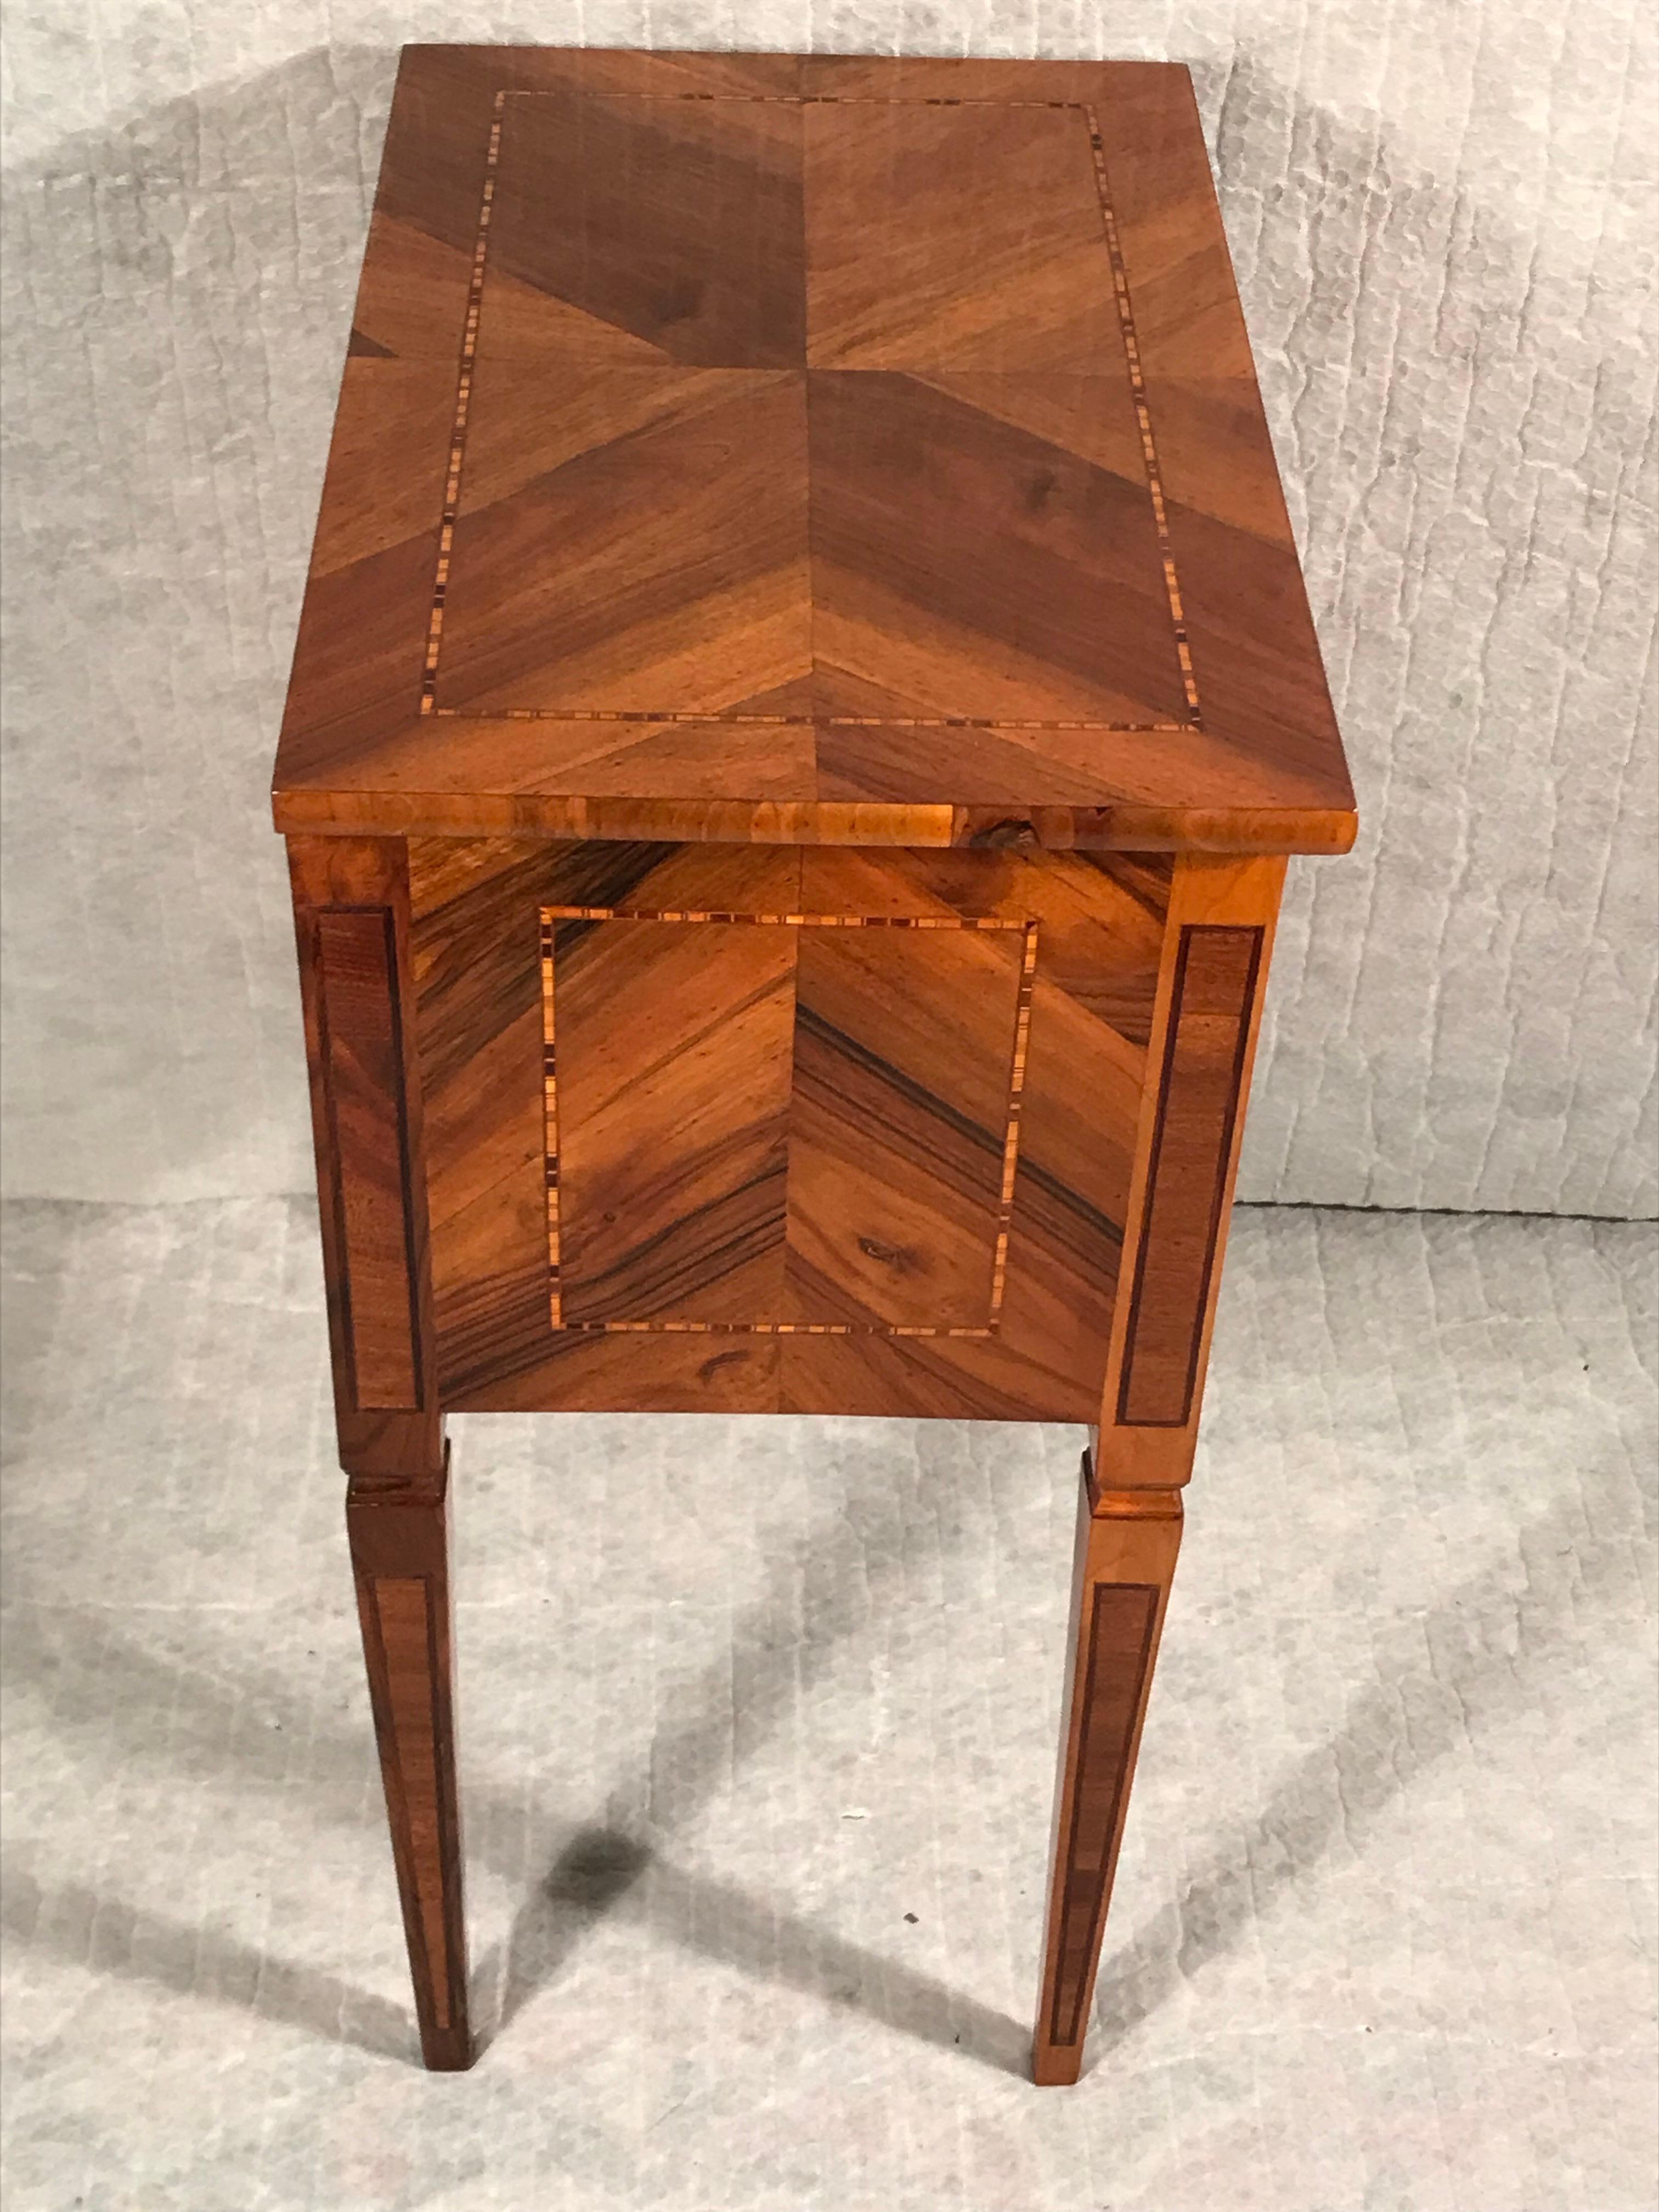 This beautiful side table from the Louis XVI Period dates back to 1780 and comes from southern Germany. The side table has two drawers. It is decorated with a pretty walnut veneer and inlaid plum and walnut band intarsia. It comes expertly